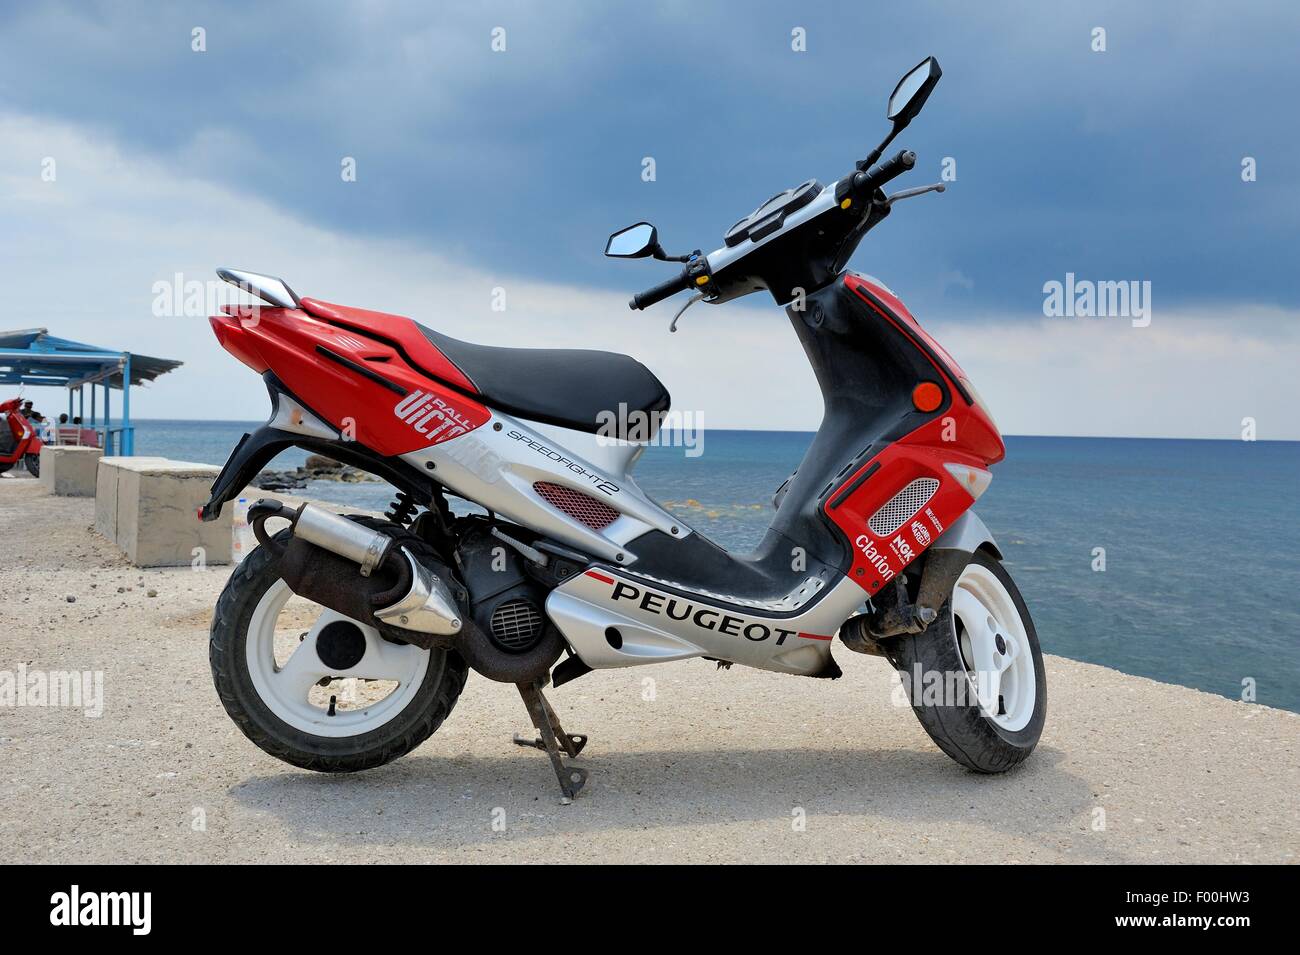 https://c8.alamy.com/comp/F00HW3/a-peugeot-speedfight-2-french-scooter-parked-on-the-seafront-santorini-F00HW3.jpg